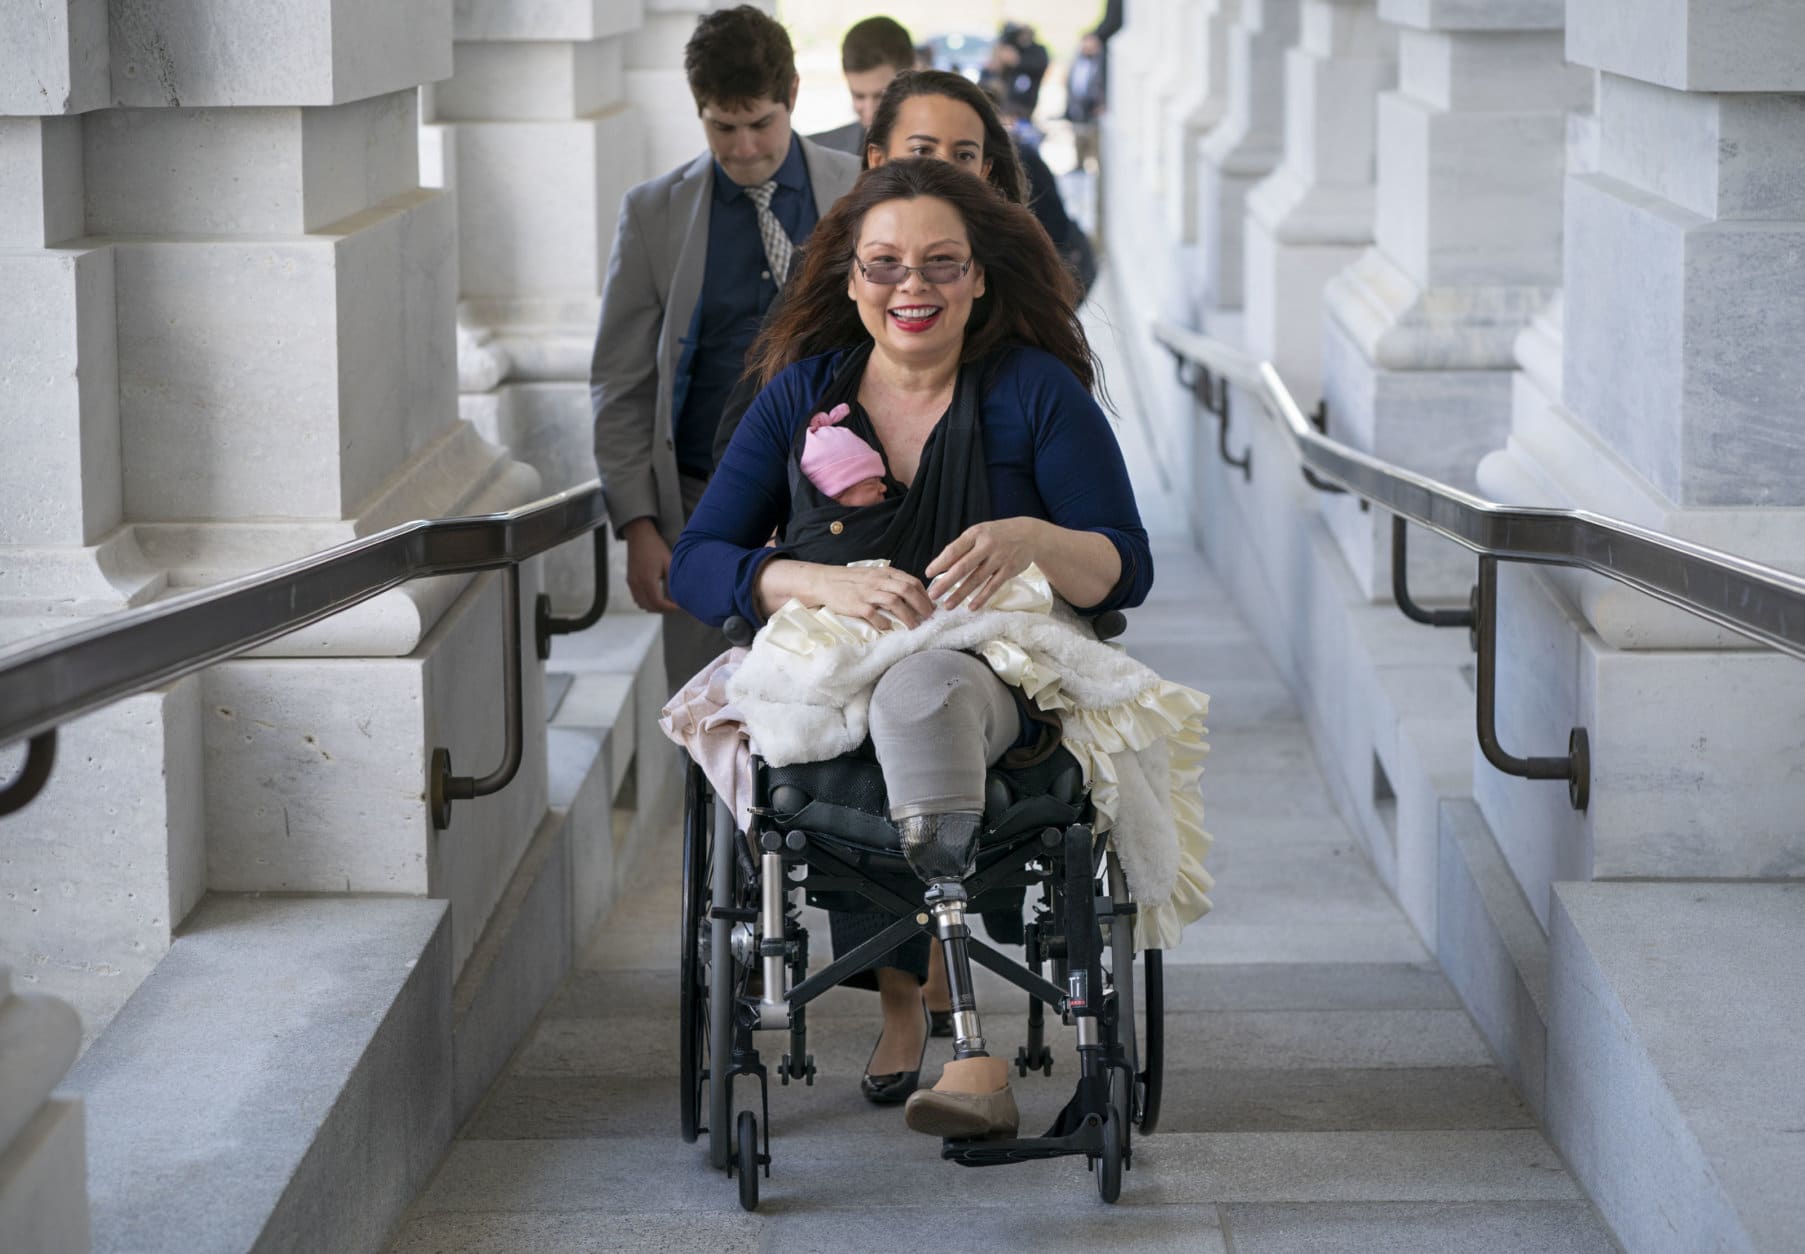 Sen. Tammy Duckworth, D-Ill., arrives at the Capitol for a close vote with her new daughter, Maile, bundled against the wind, in Washington on April 19, 2018. In an historic change in Senate rules, the lawmakers decided to allow babies of members on the floor during votes. (AP Photo/J. Scott Applewhite)